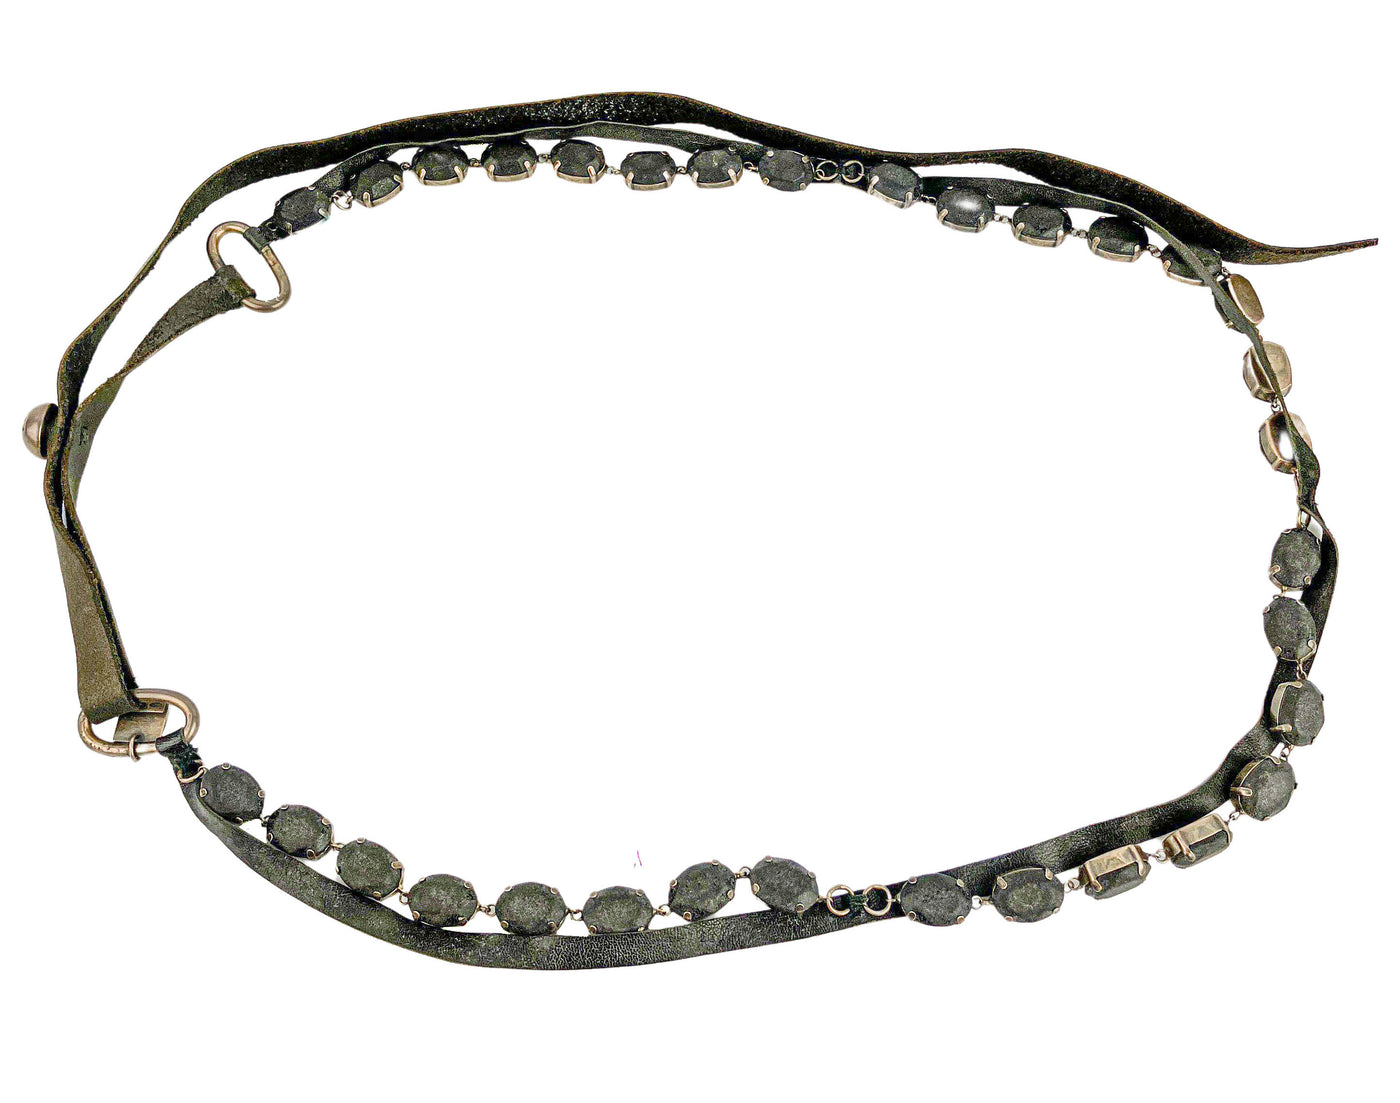 Goti Matte Bead and Leather Necklace - Discounts on Goti at UAL